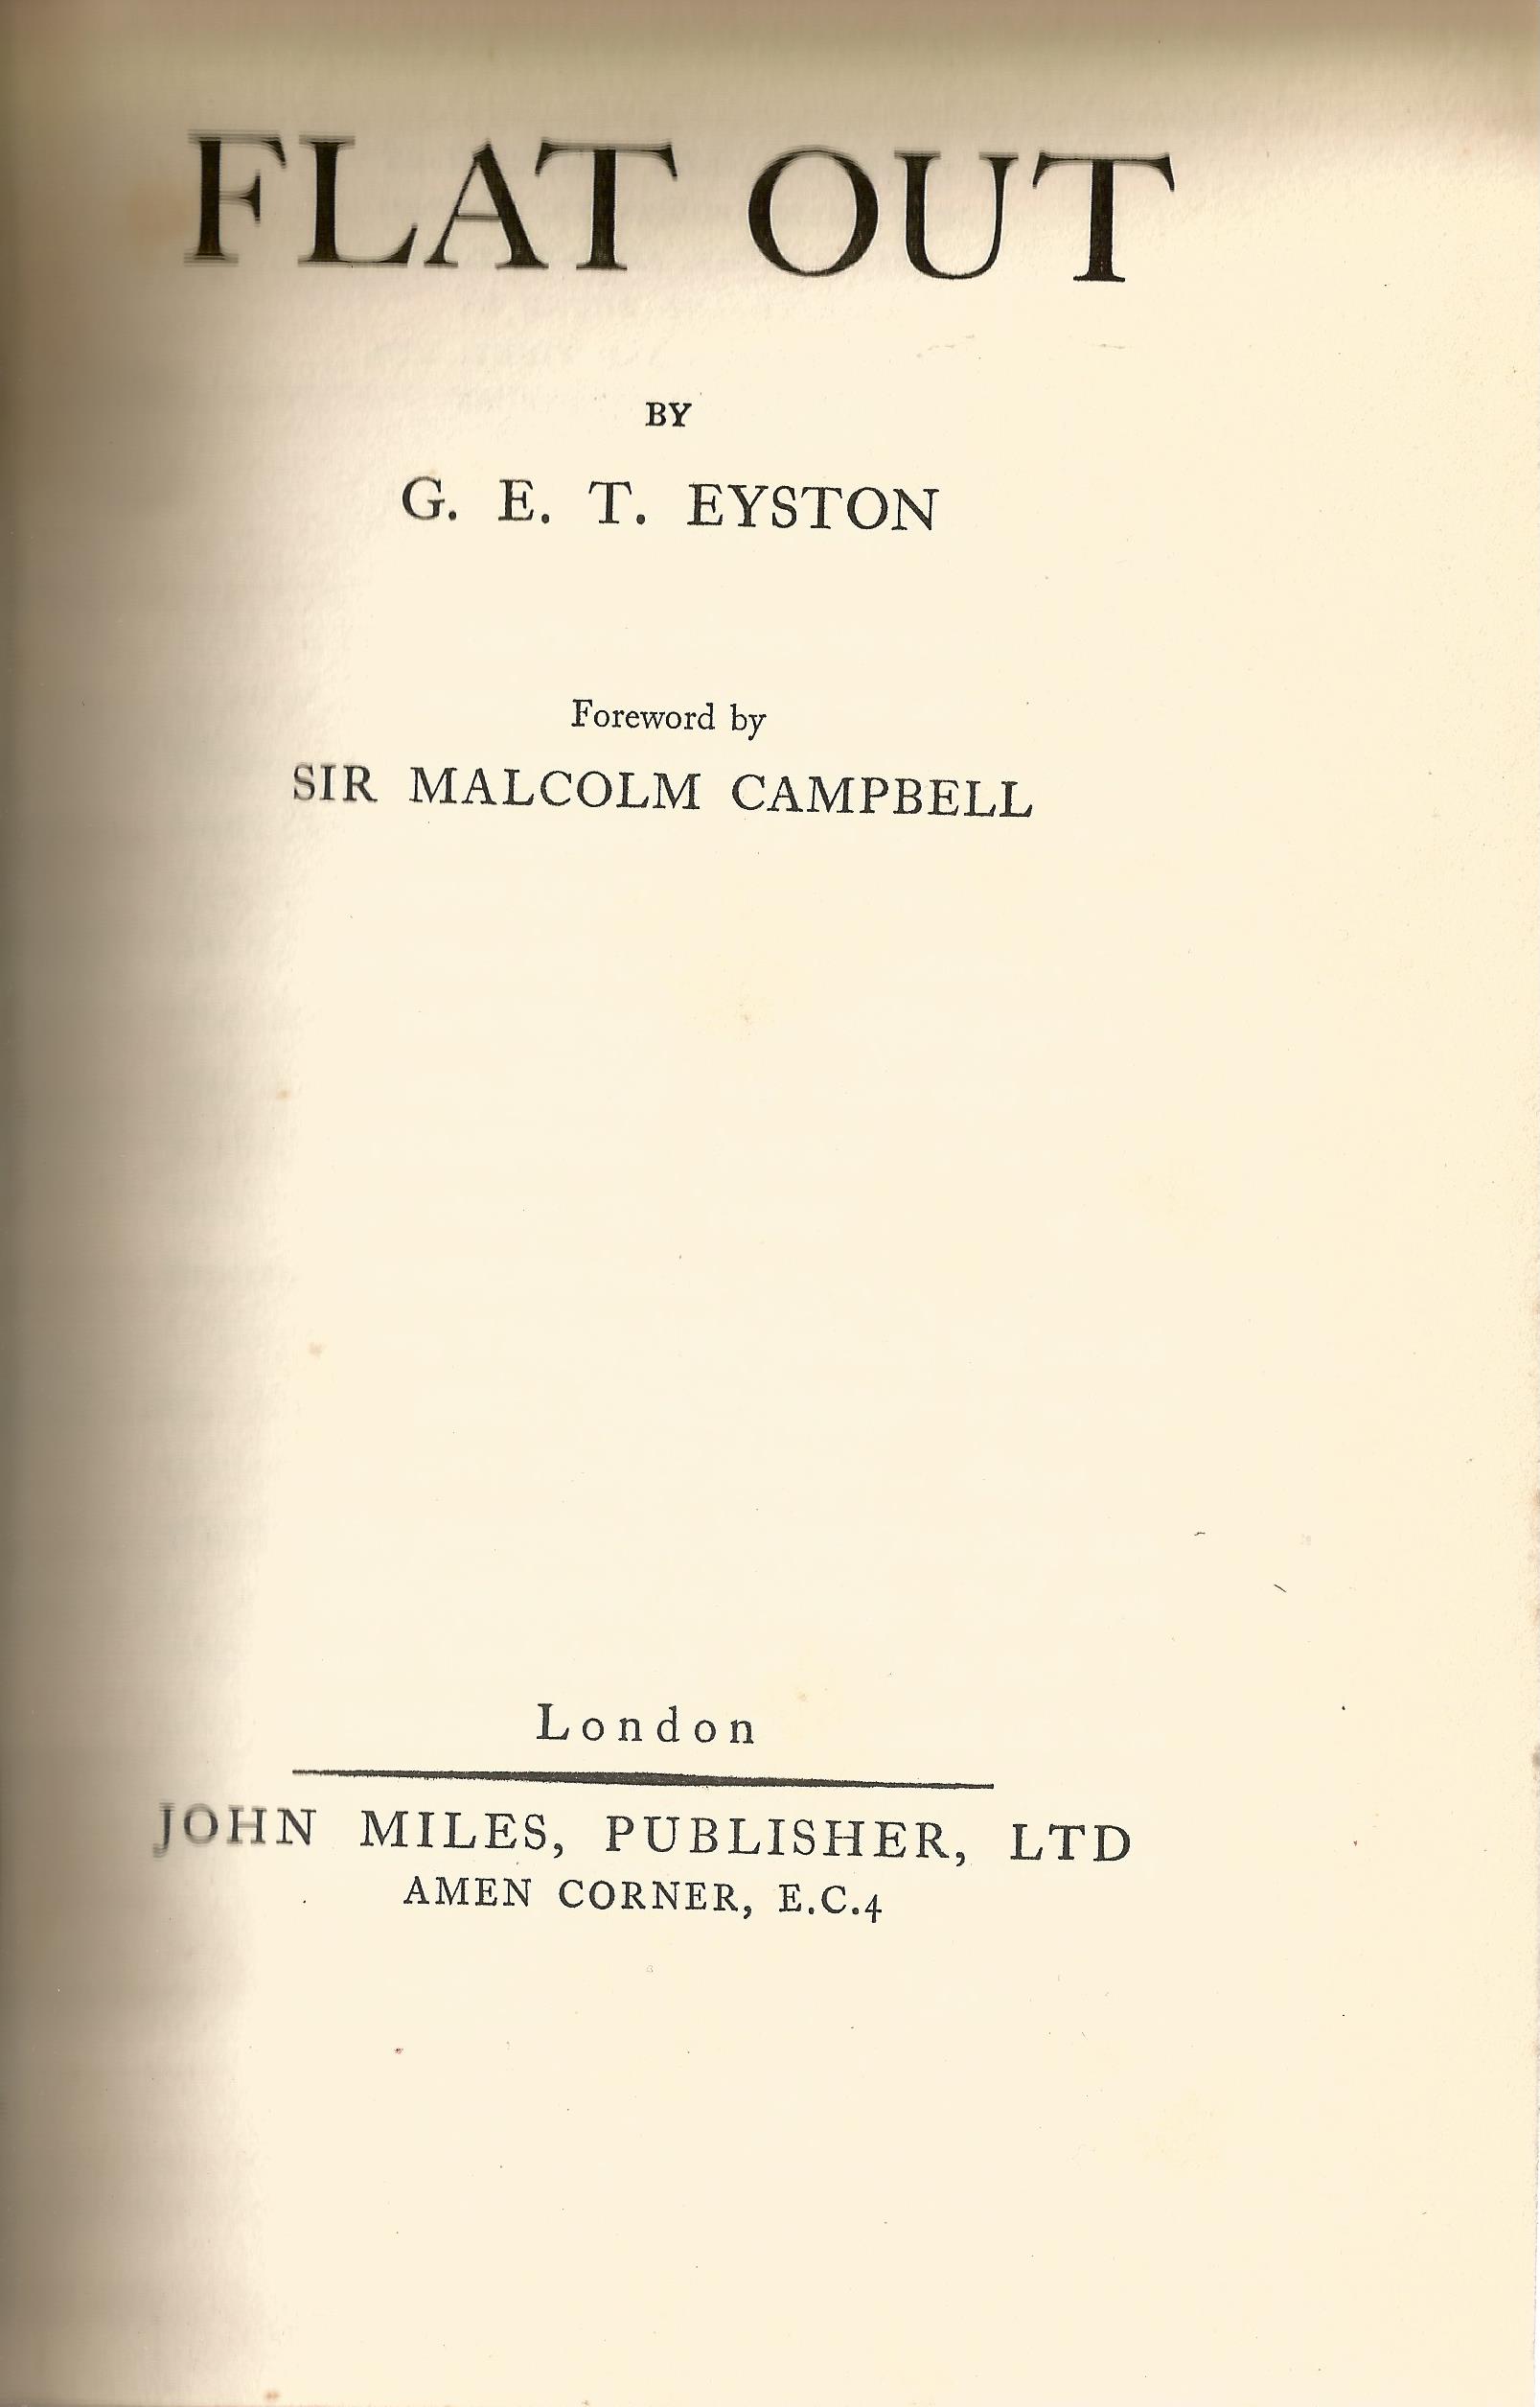 G. E. T. Eyston hardback book Flat Out 1933 published by John Miles Publisher Ltd some age related - Image 2 of 2